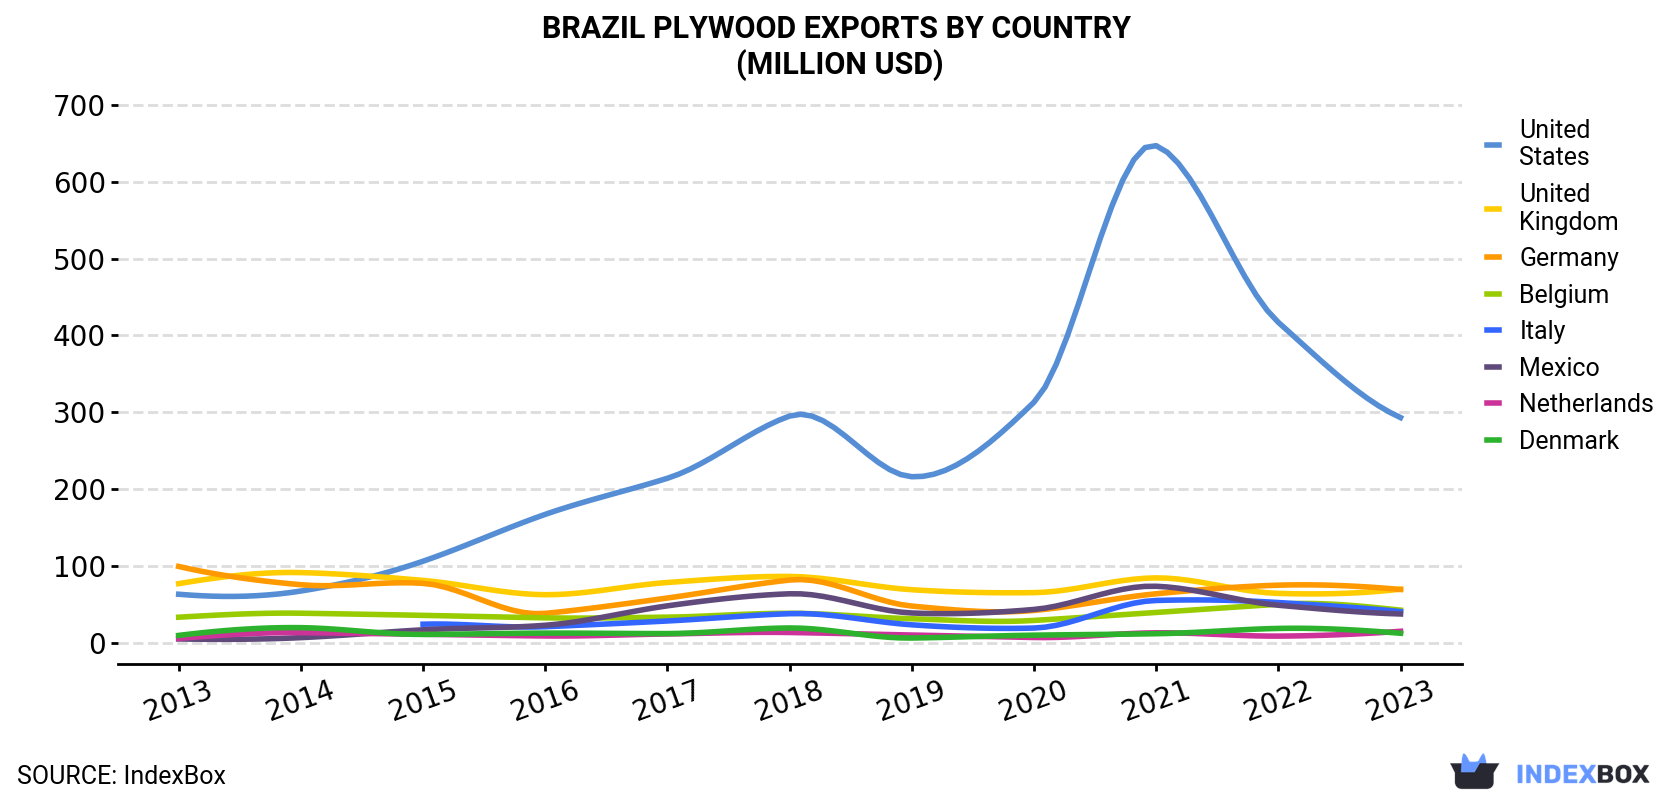 Brazil Plywood Exports By Country (Million USD)